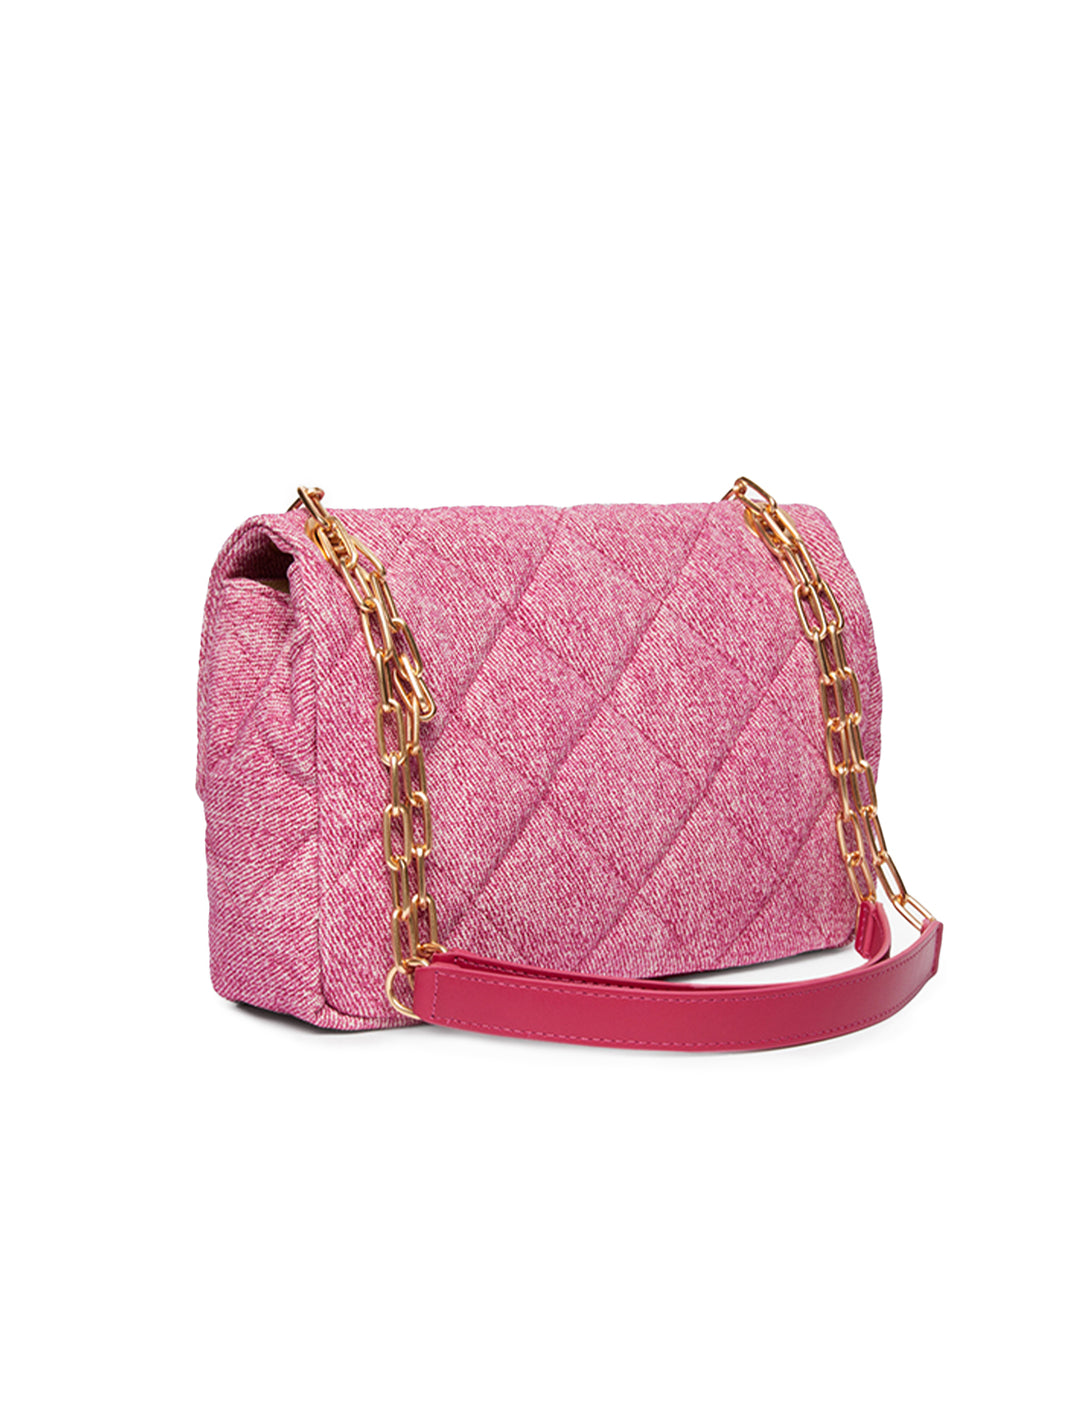 Back view of Vanessa Bruno's Moon MM Bag in fuchsia.